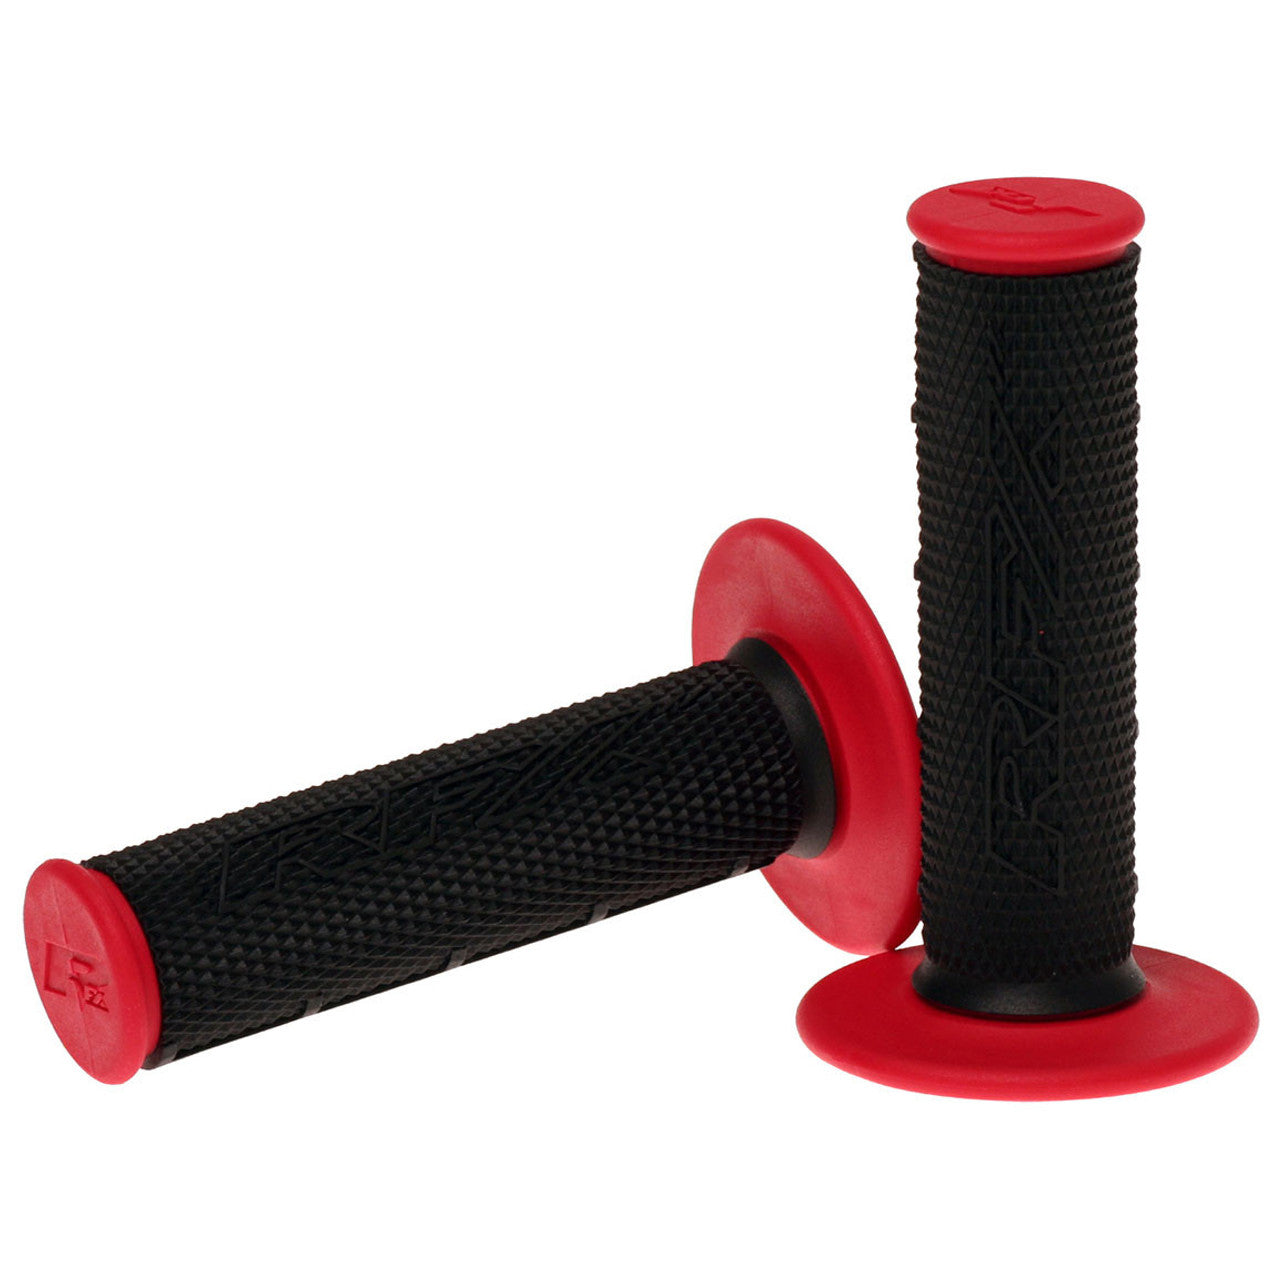 RFX Pro Series Dual Compound Grips Black/Red